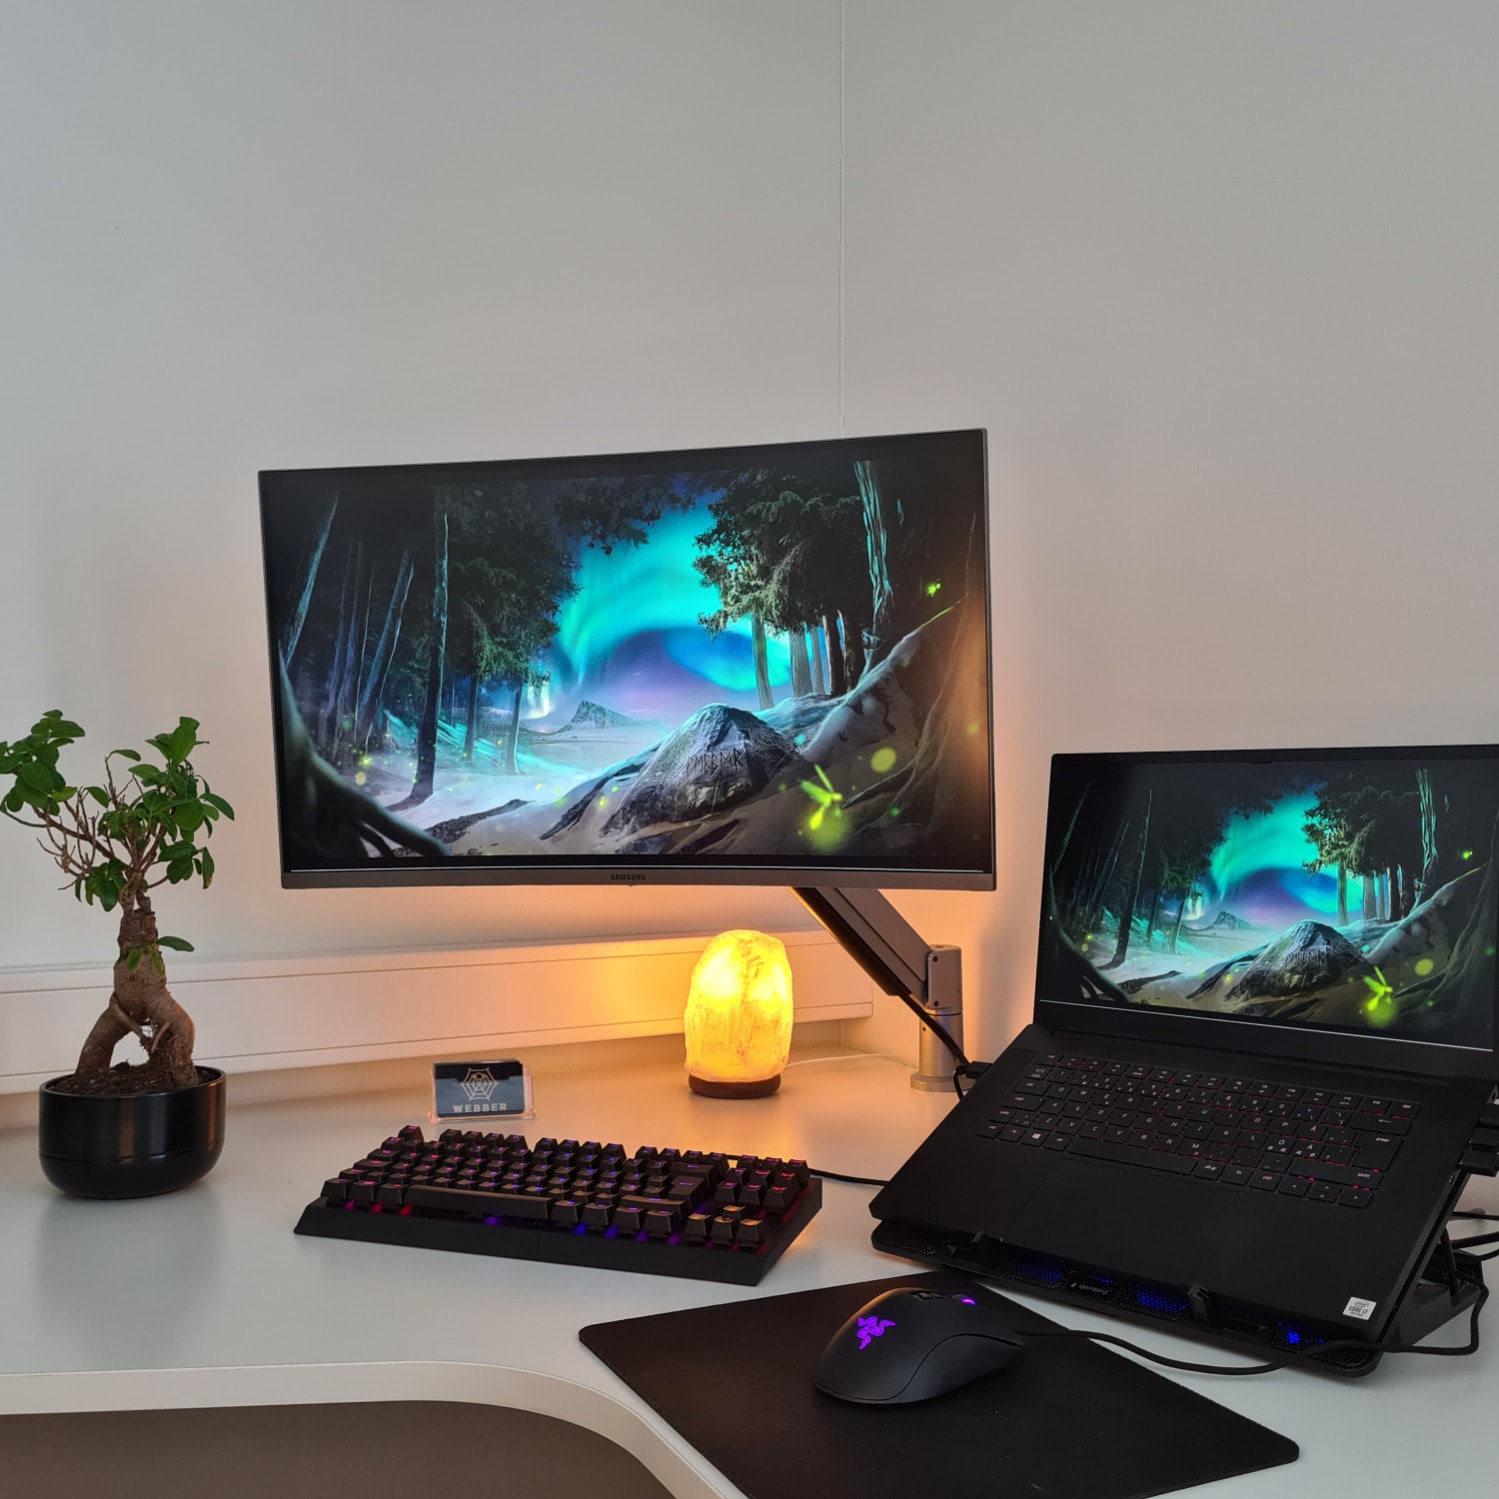 Complete office setup with Razer gear